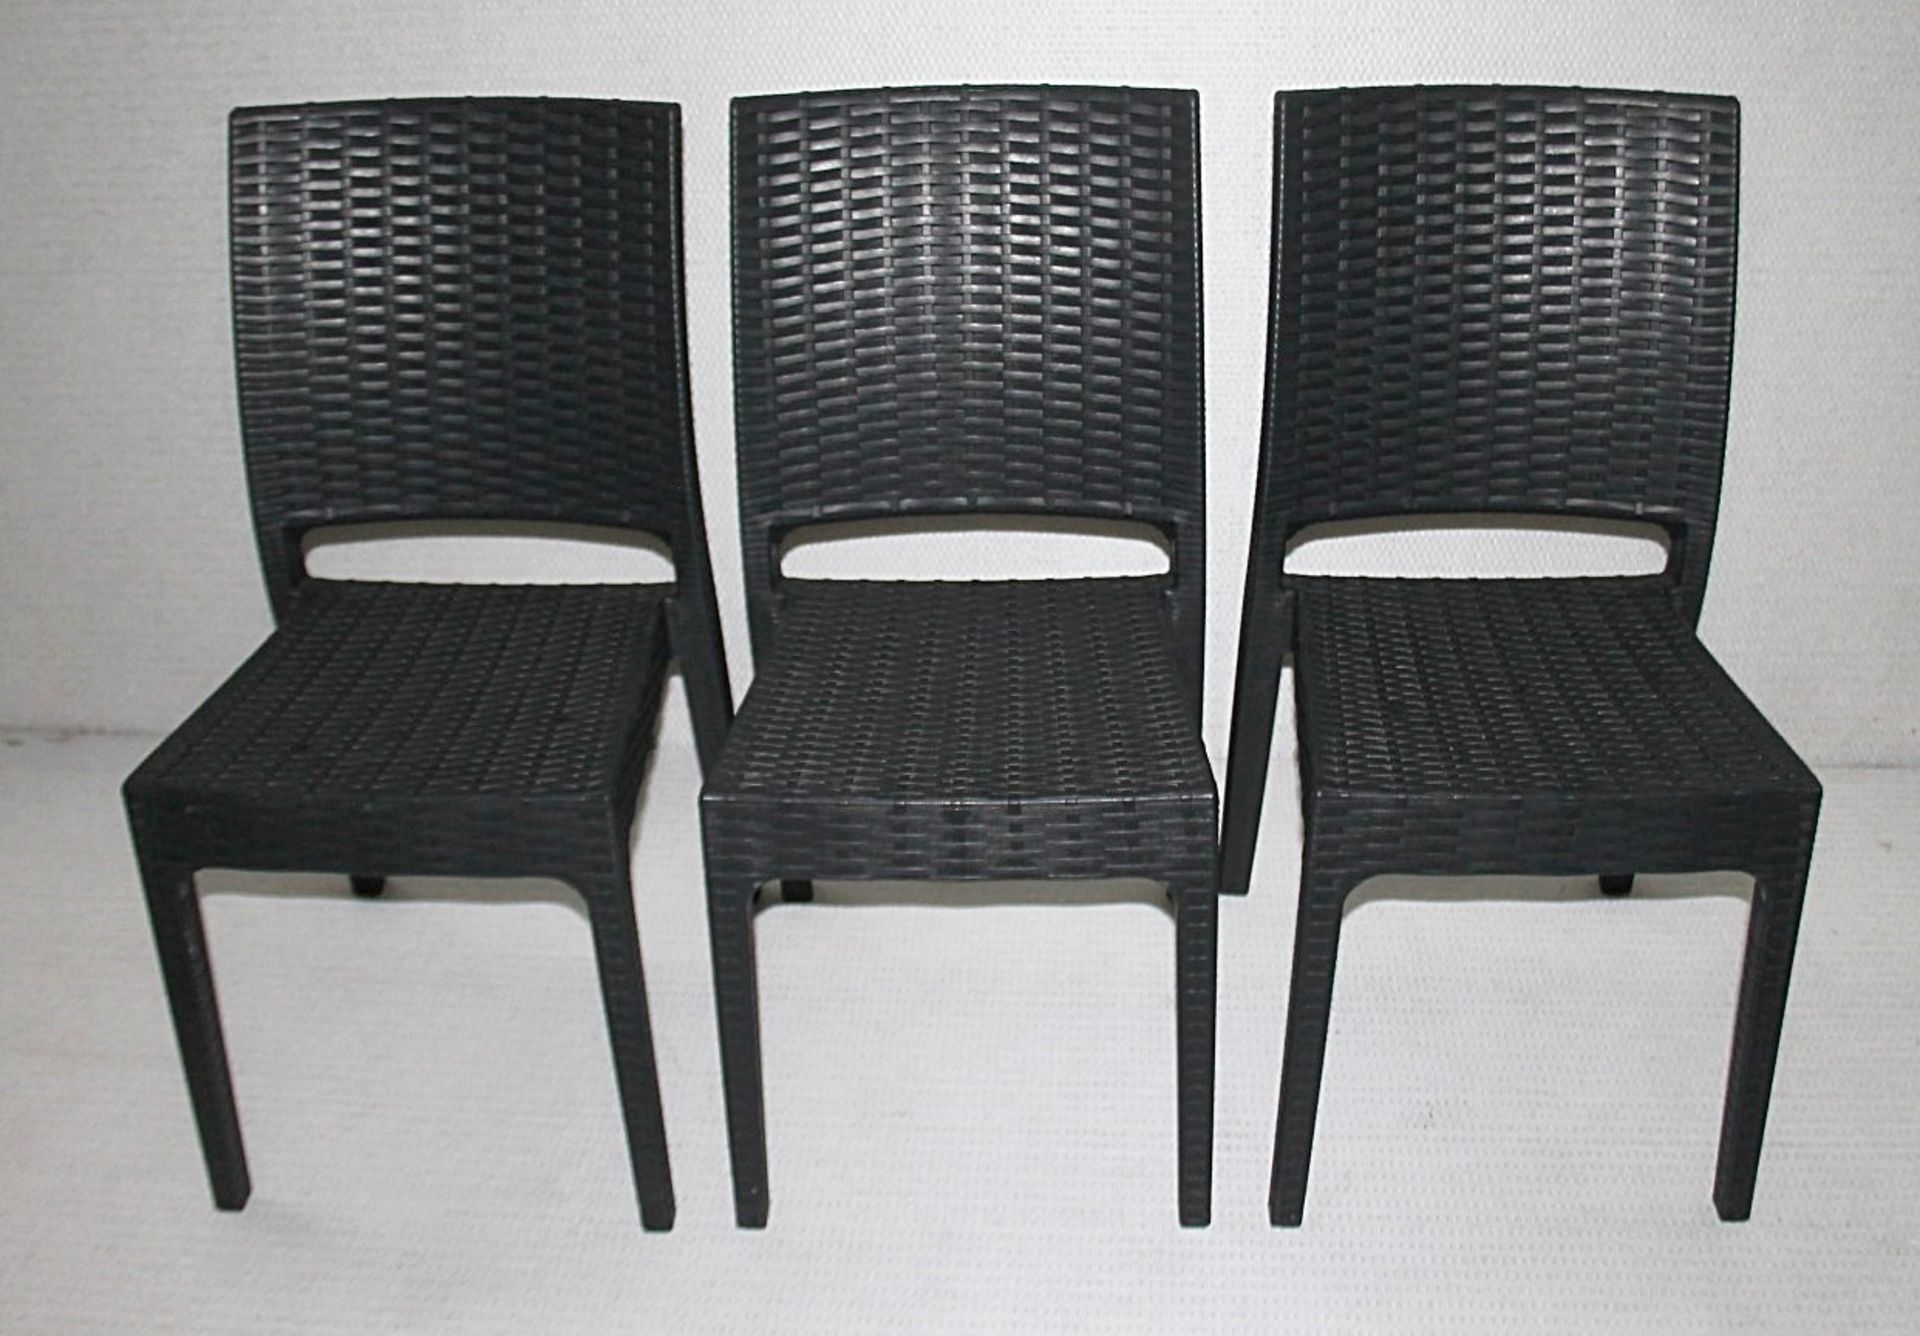 4 x SIESTA EXCLUSIVE 'Florida' Commercial Stackable Rattan-style Chairs In Dark Grey - RRP £320.00 - Image 9 of 13